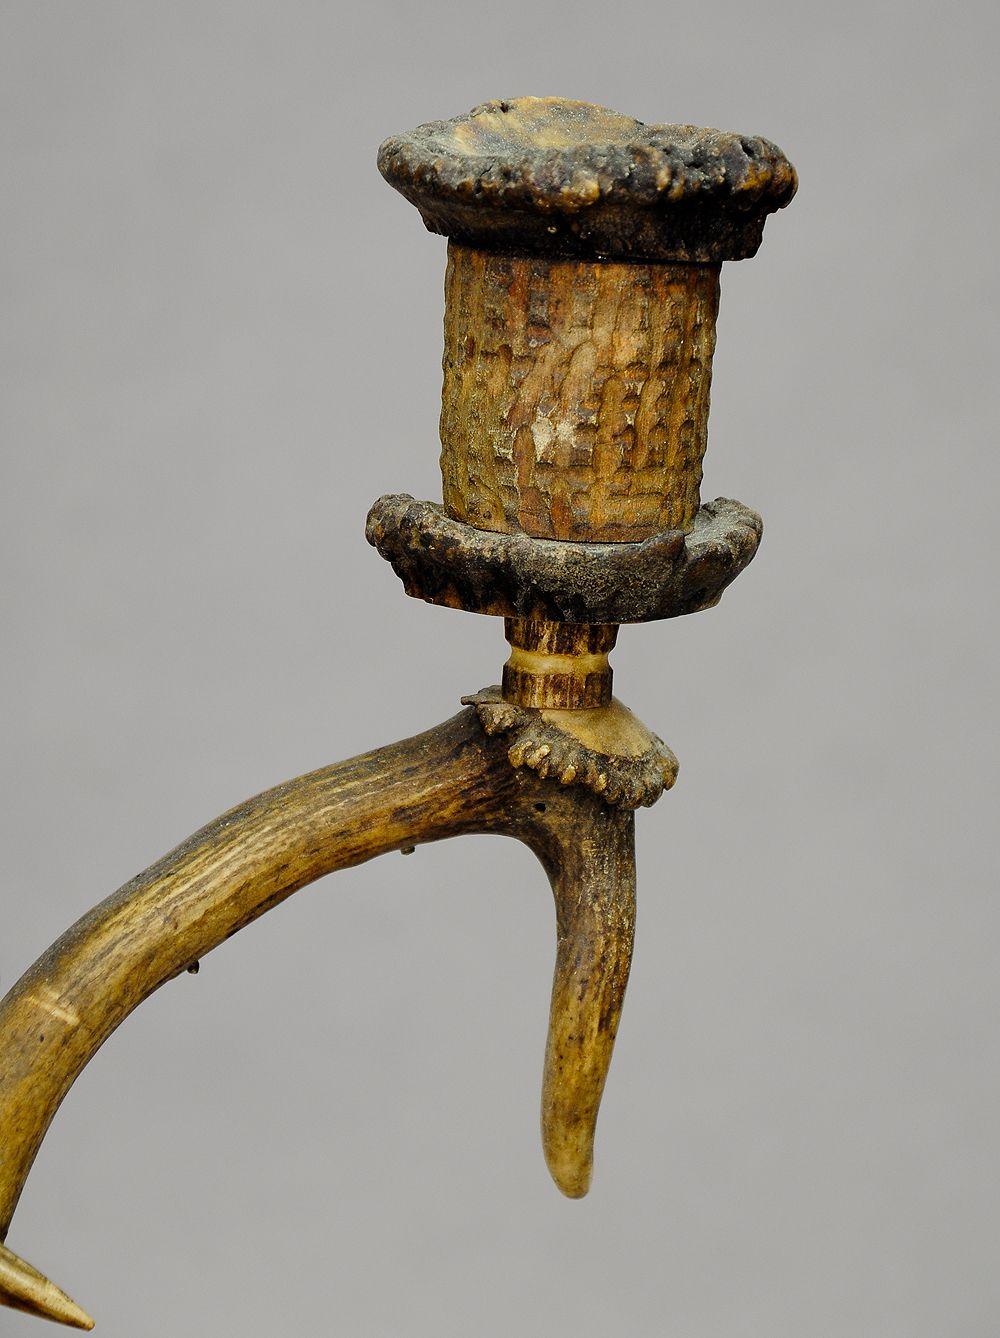 19th Century Rustic Antler Candleholder from Germany, circa 1900